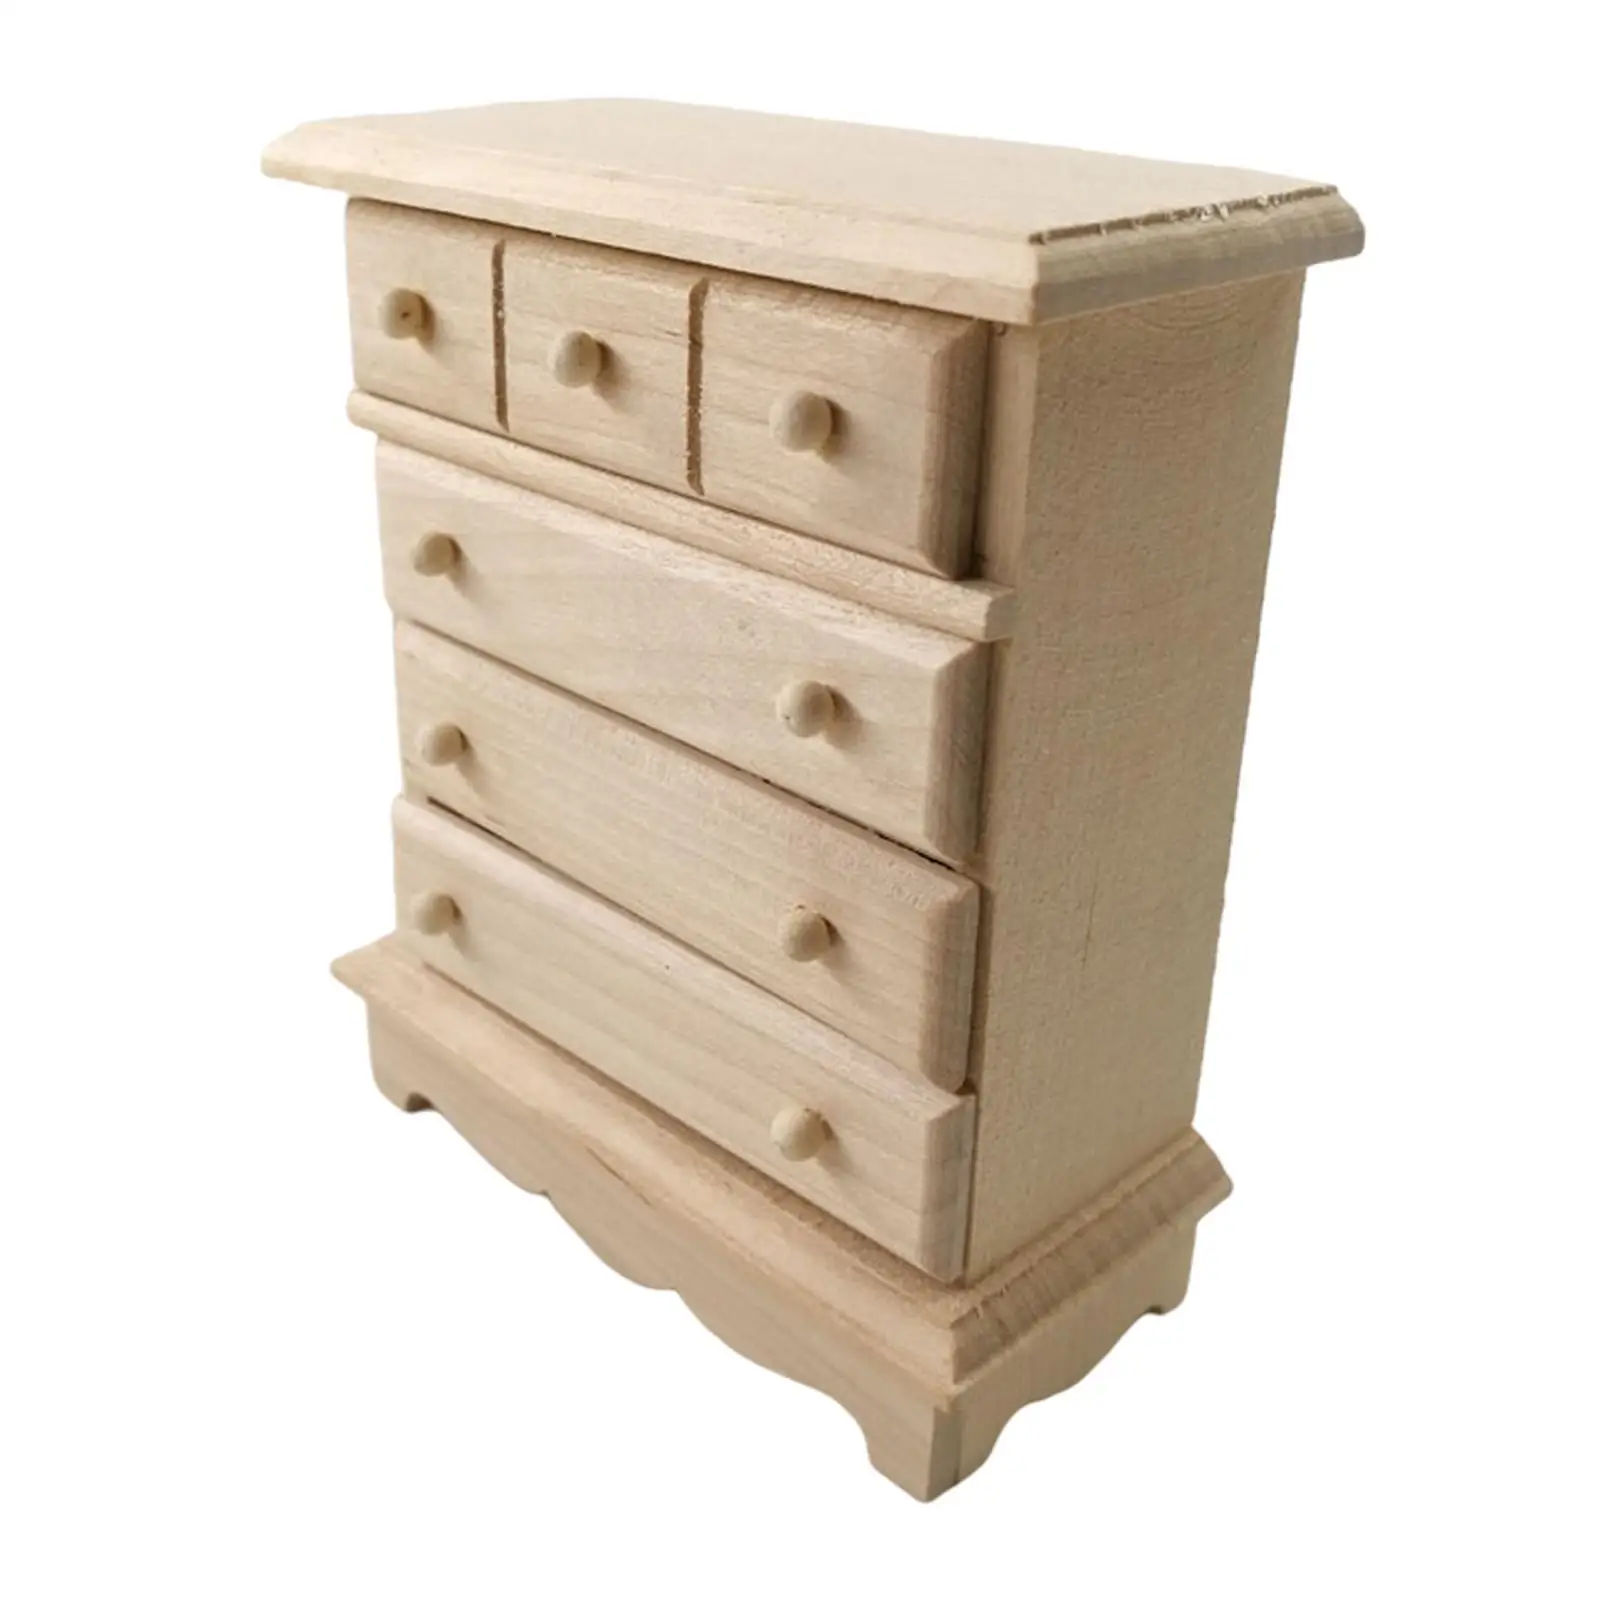 1 Piece Drawer Cupboard Dollhouse Wooden Burlywood Accessories Shelf Collection Cottage Miniature Furniture for Office Bathroom